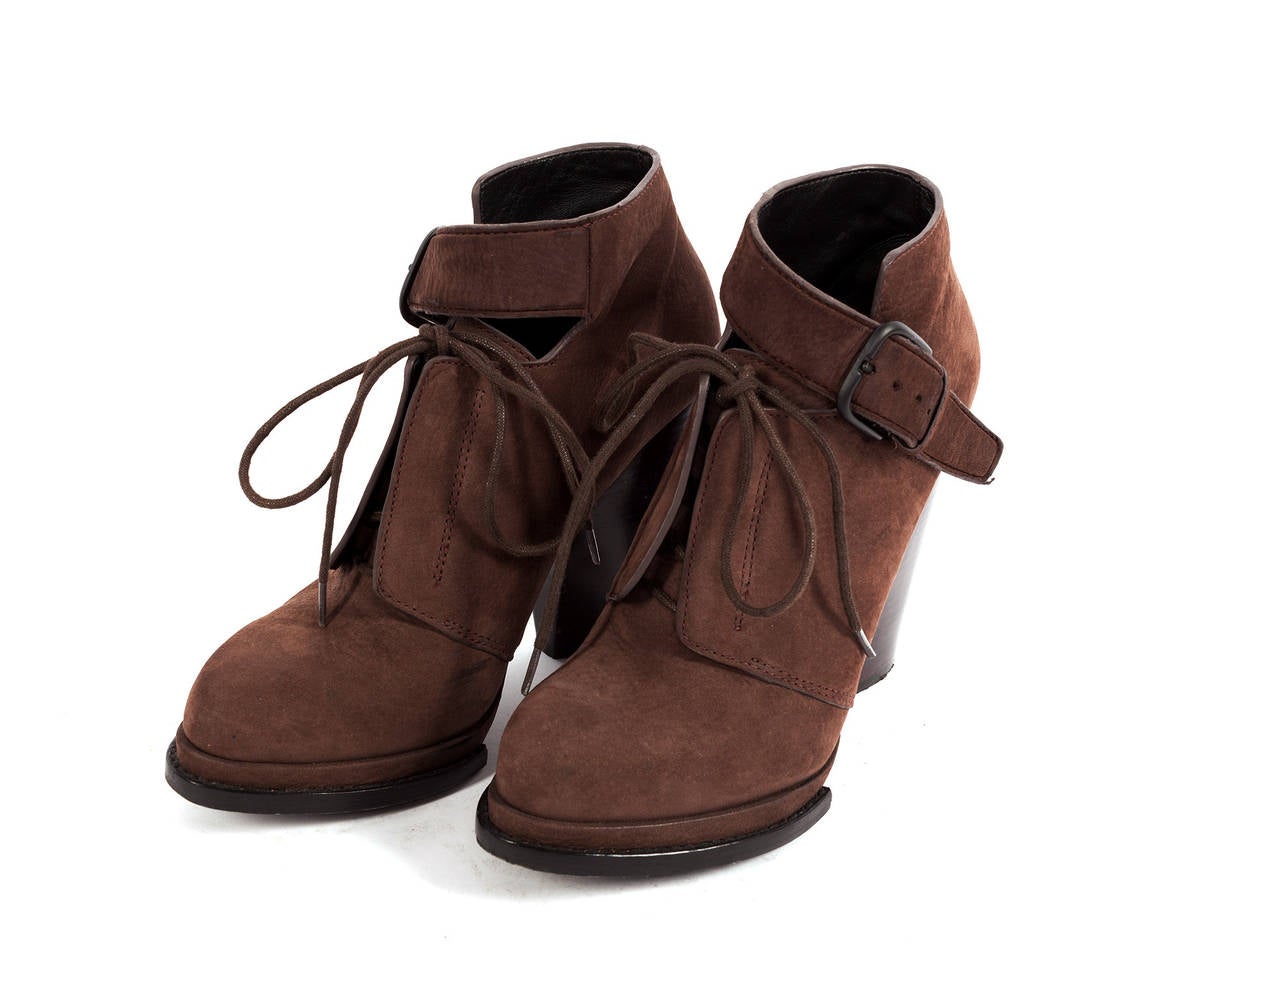 Plateau has multi details, shoe laces, front side strap with buckle and large oversized wooden heel.